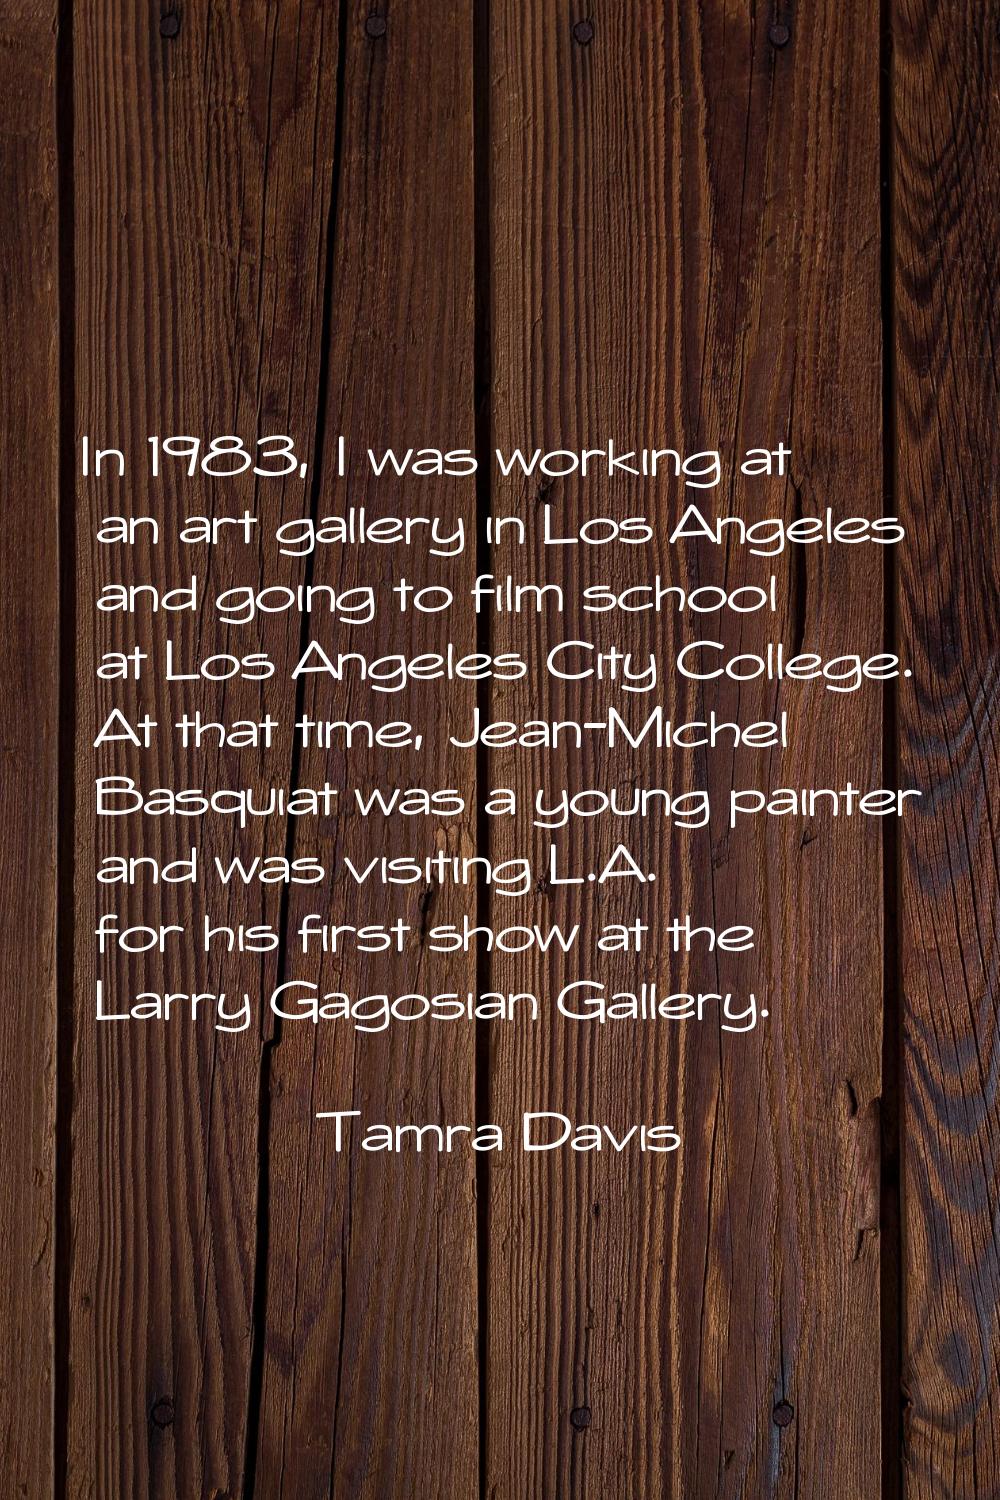 In 1983, I was working at an art gallery in Los Angeles and going to film school at Los Angeles Cit